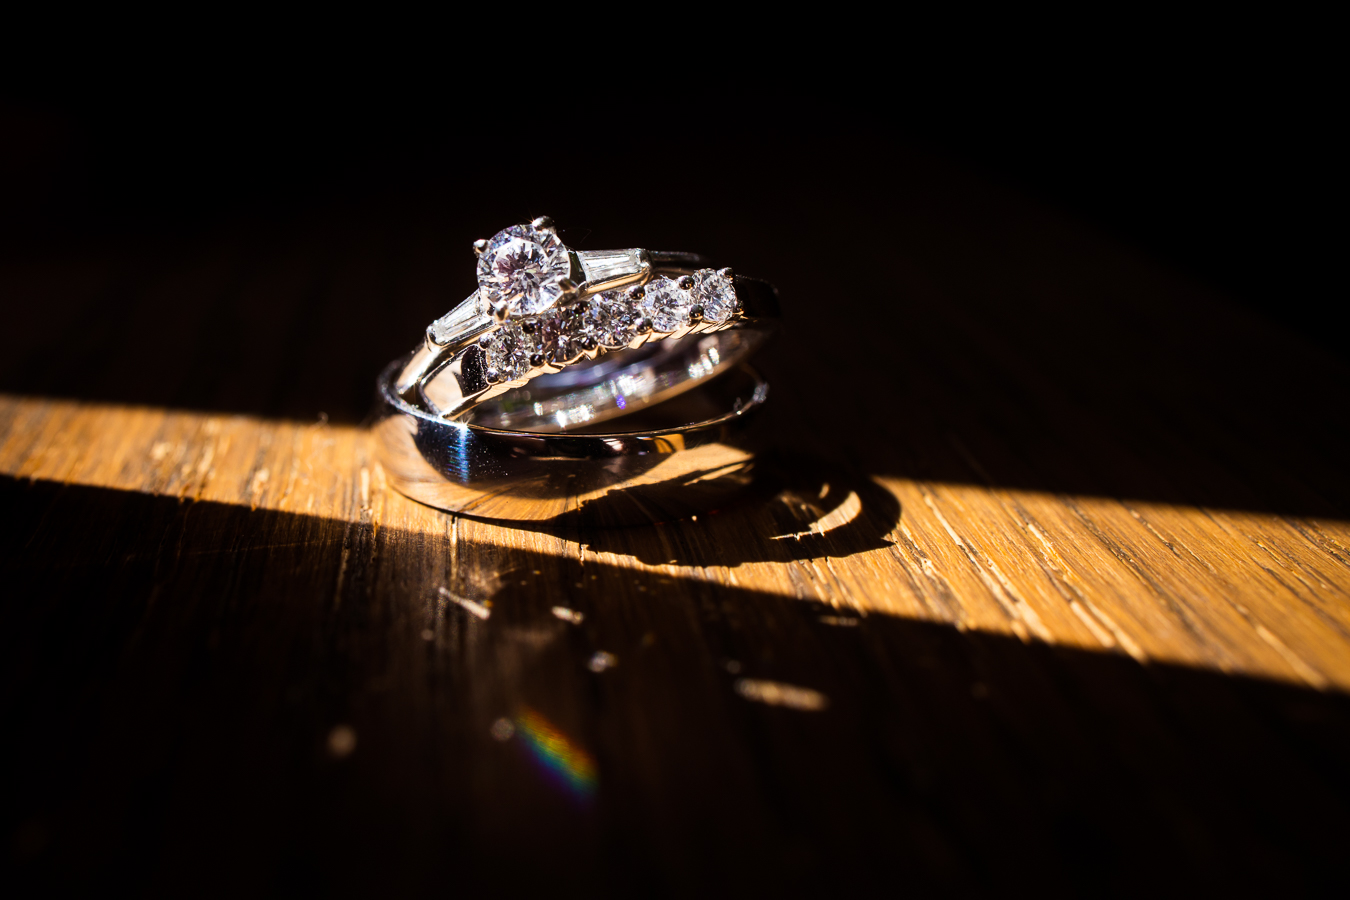 creative stahlstown wedding photographer, Lisa rhinehart, captures this stunning detail photo of this bride and groom's silver wedding rings and bands captured in the single beam of sunlight on the wooden floor